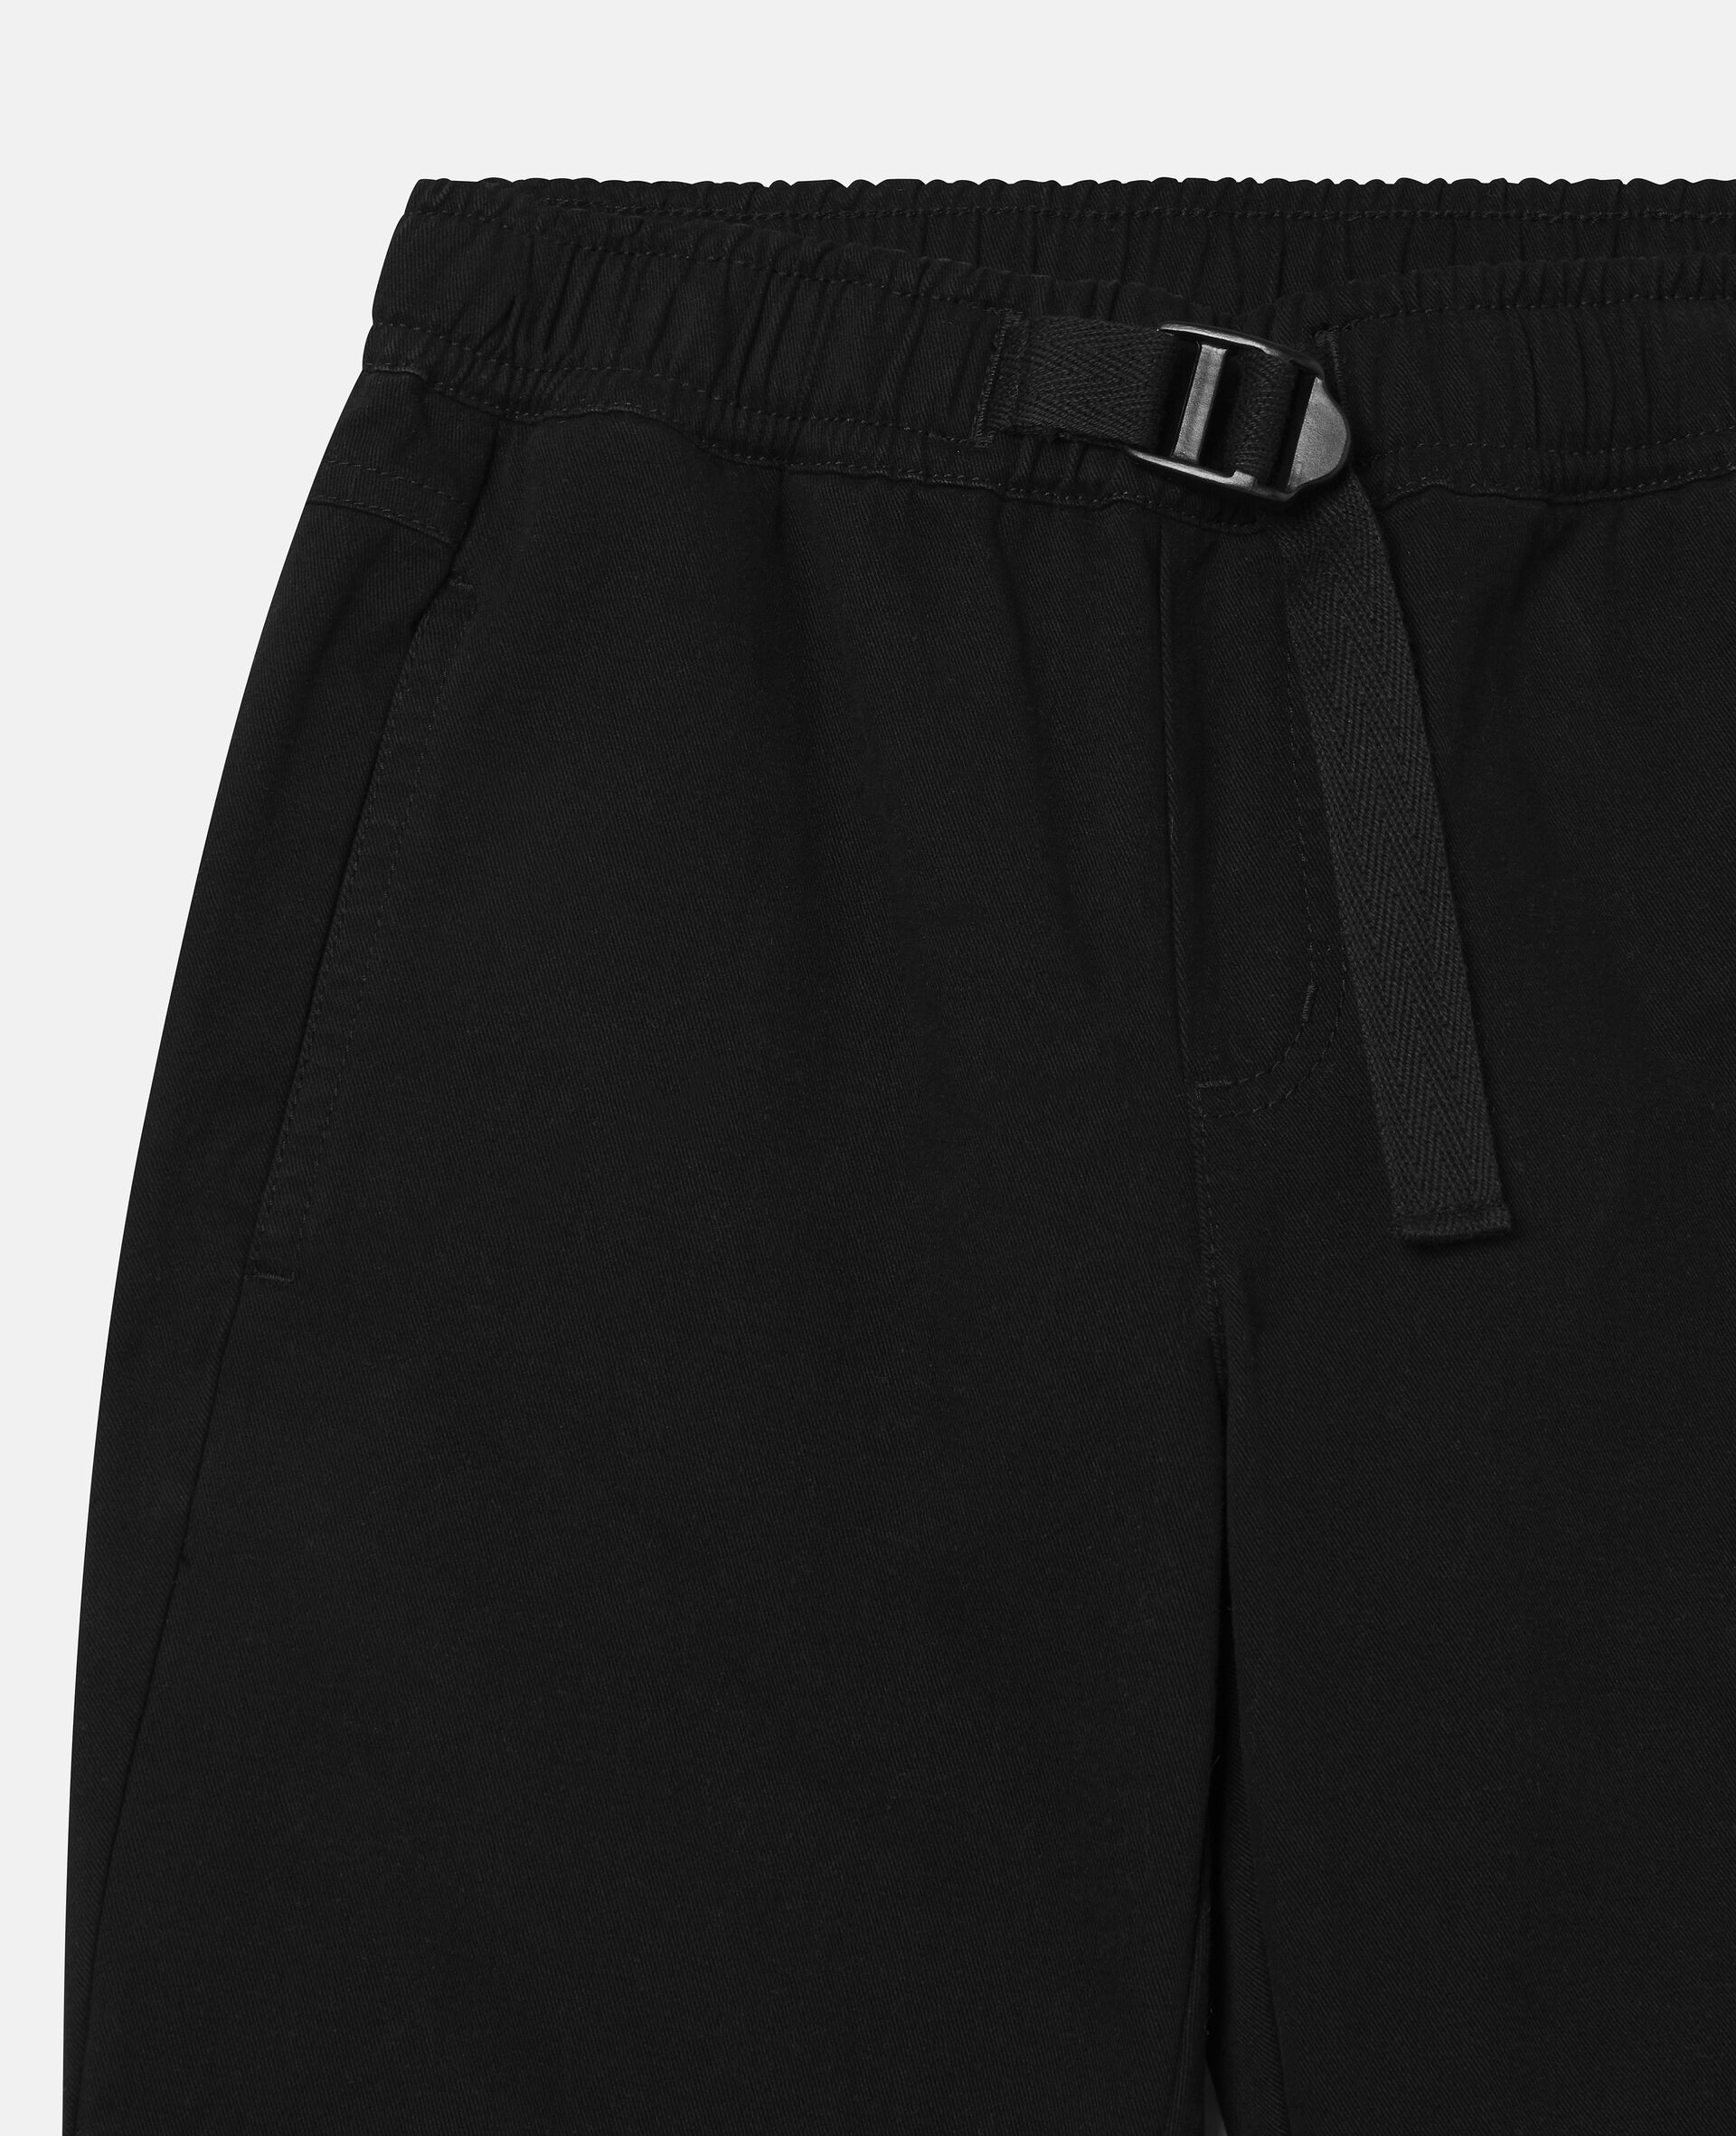 Cargo Cotton Twill Trousers-Black-large image number 1